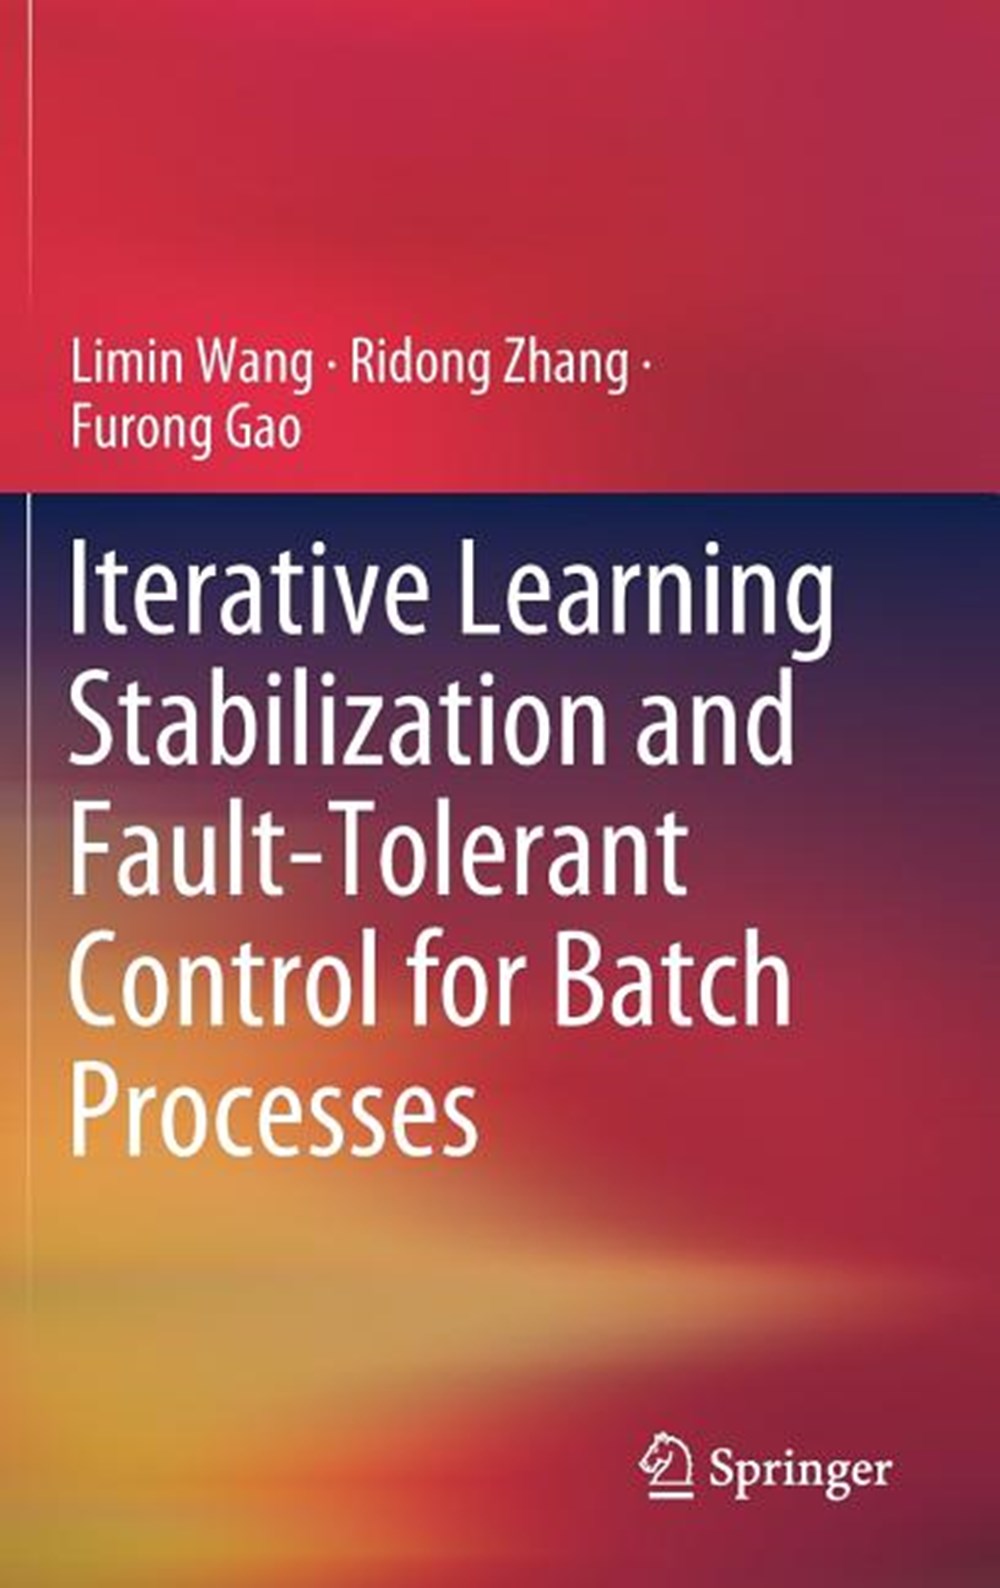 Iterative Learning Stabilization and Fault-Tolerant Control for Batch Processes (2020)